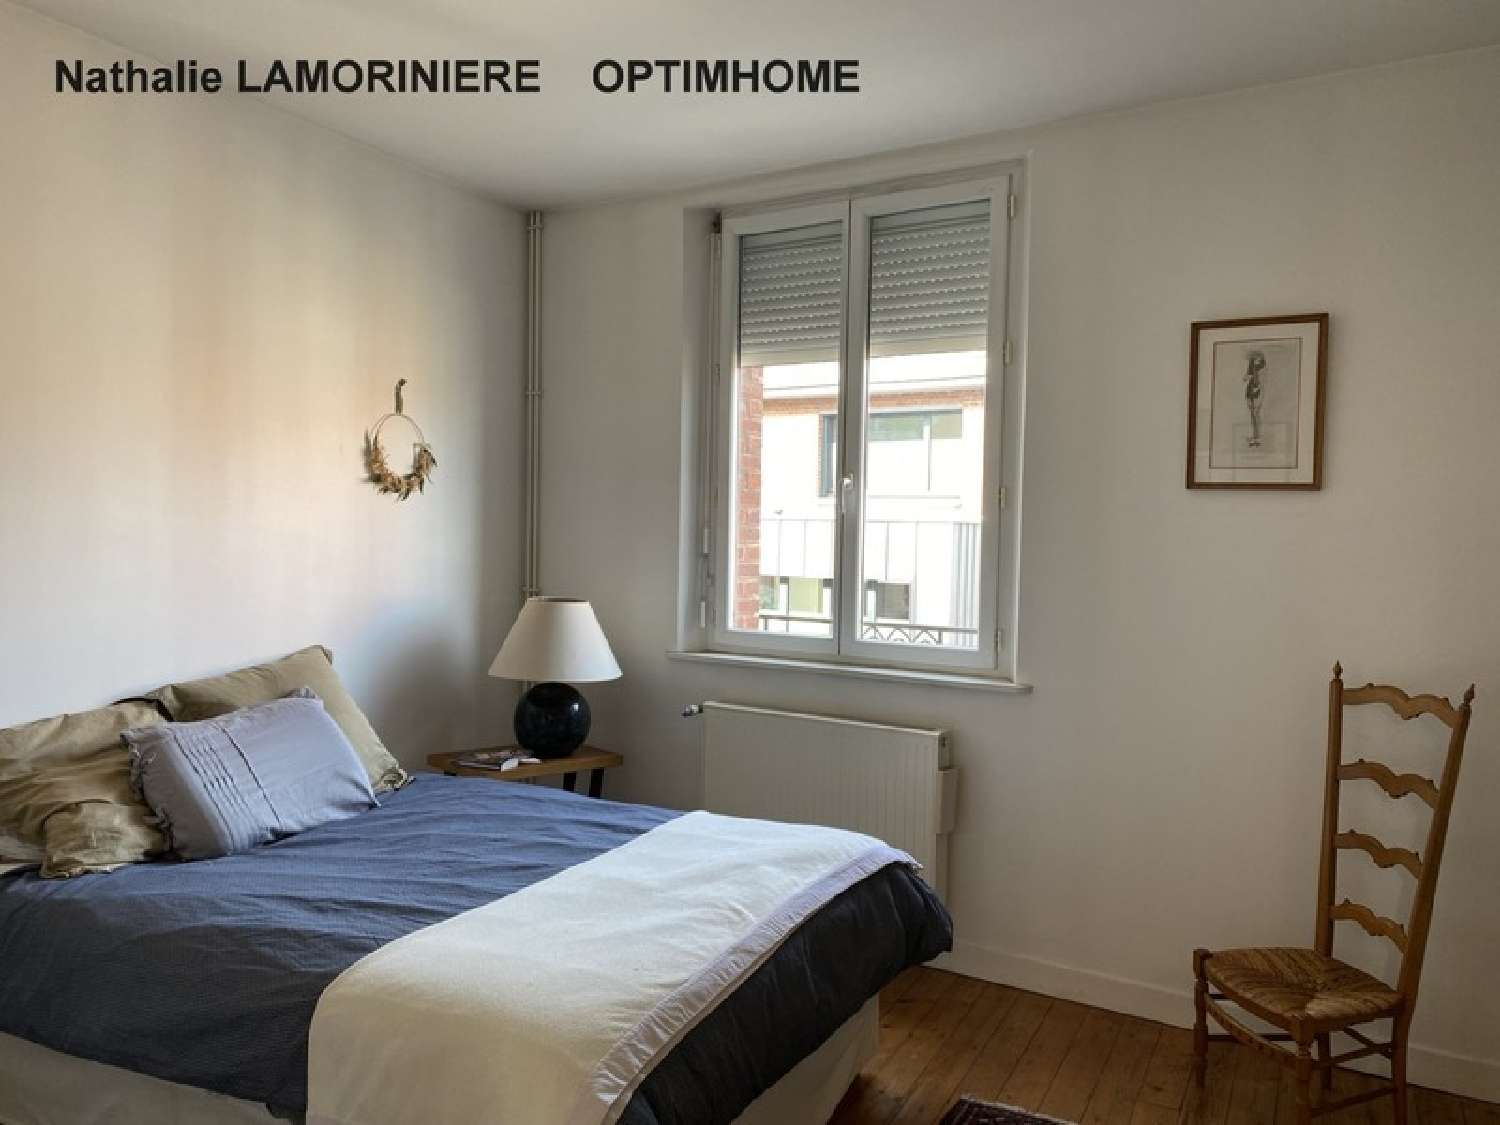  for sale house Amiens Somme 4